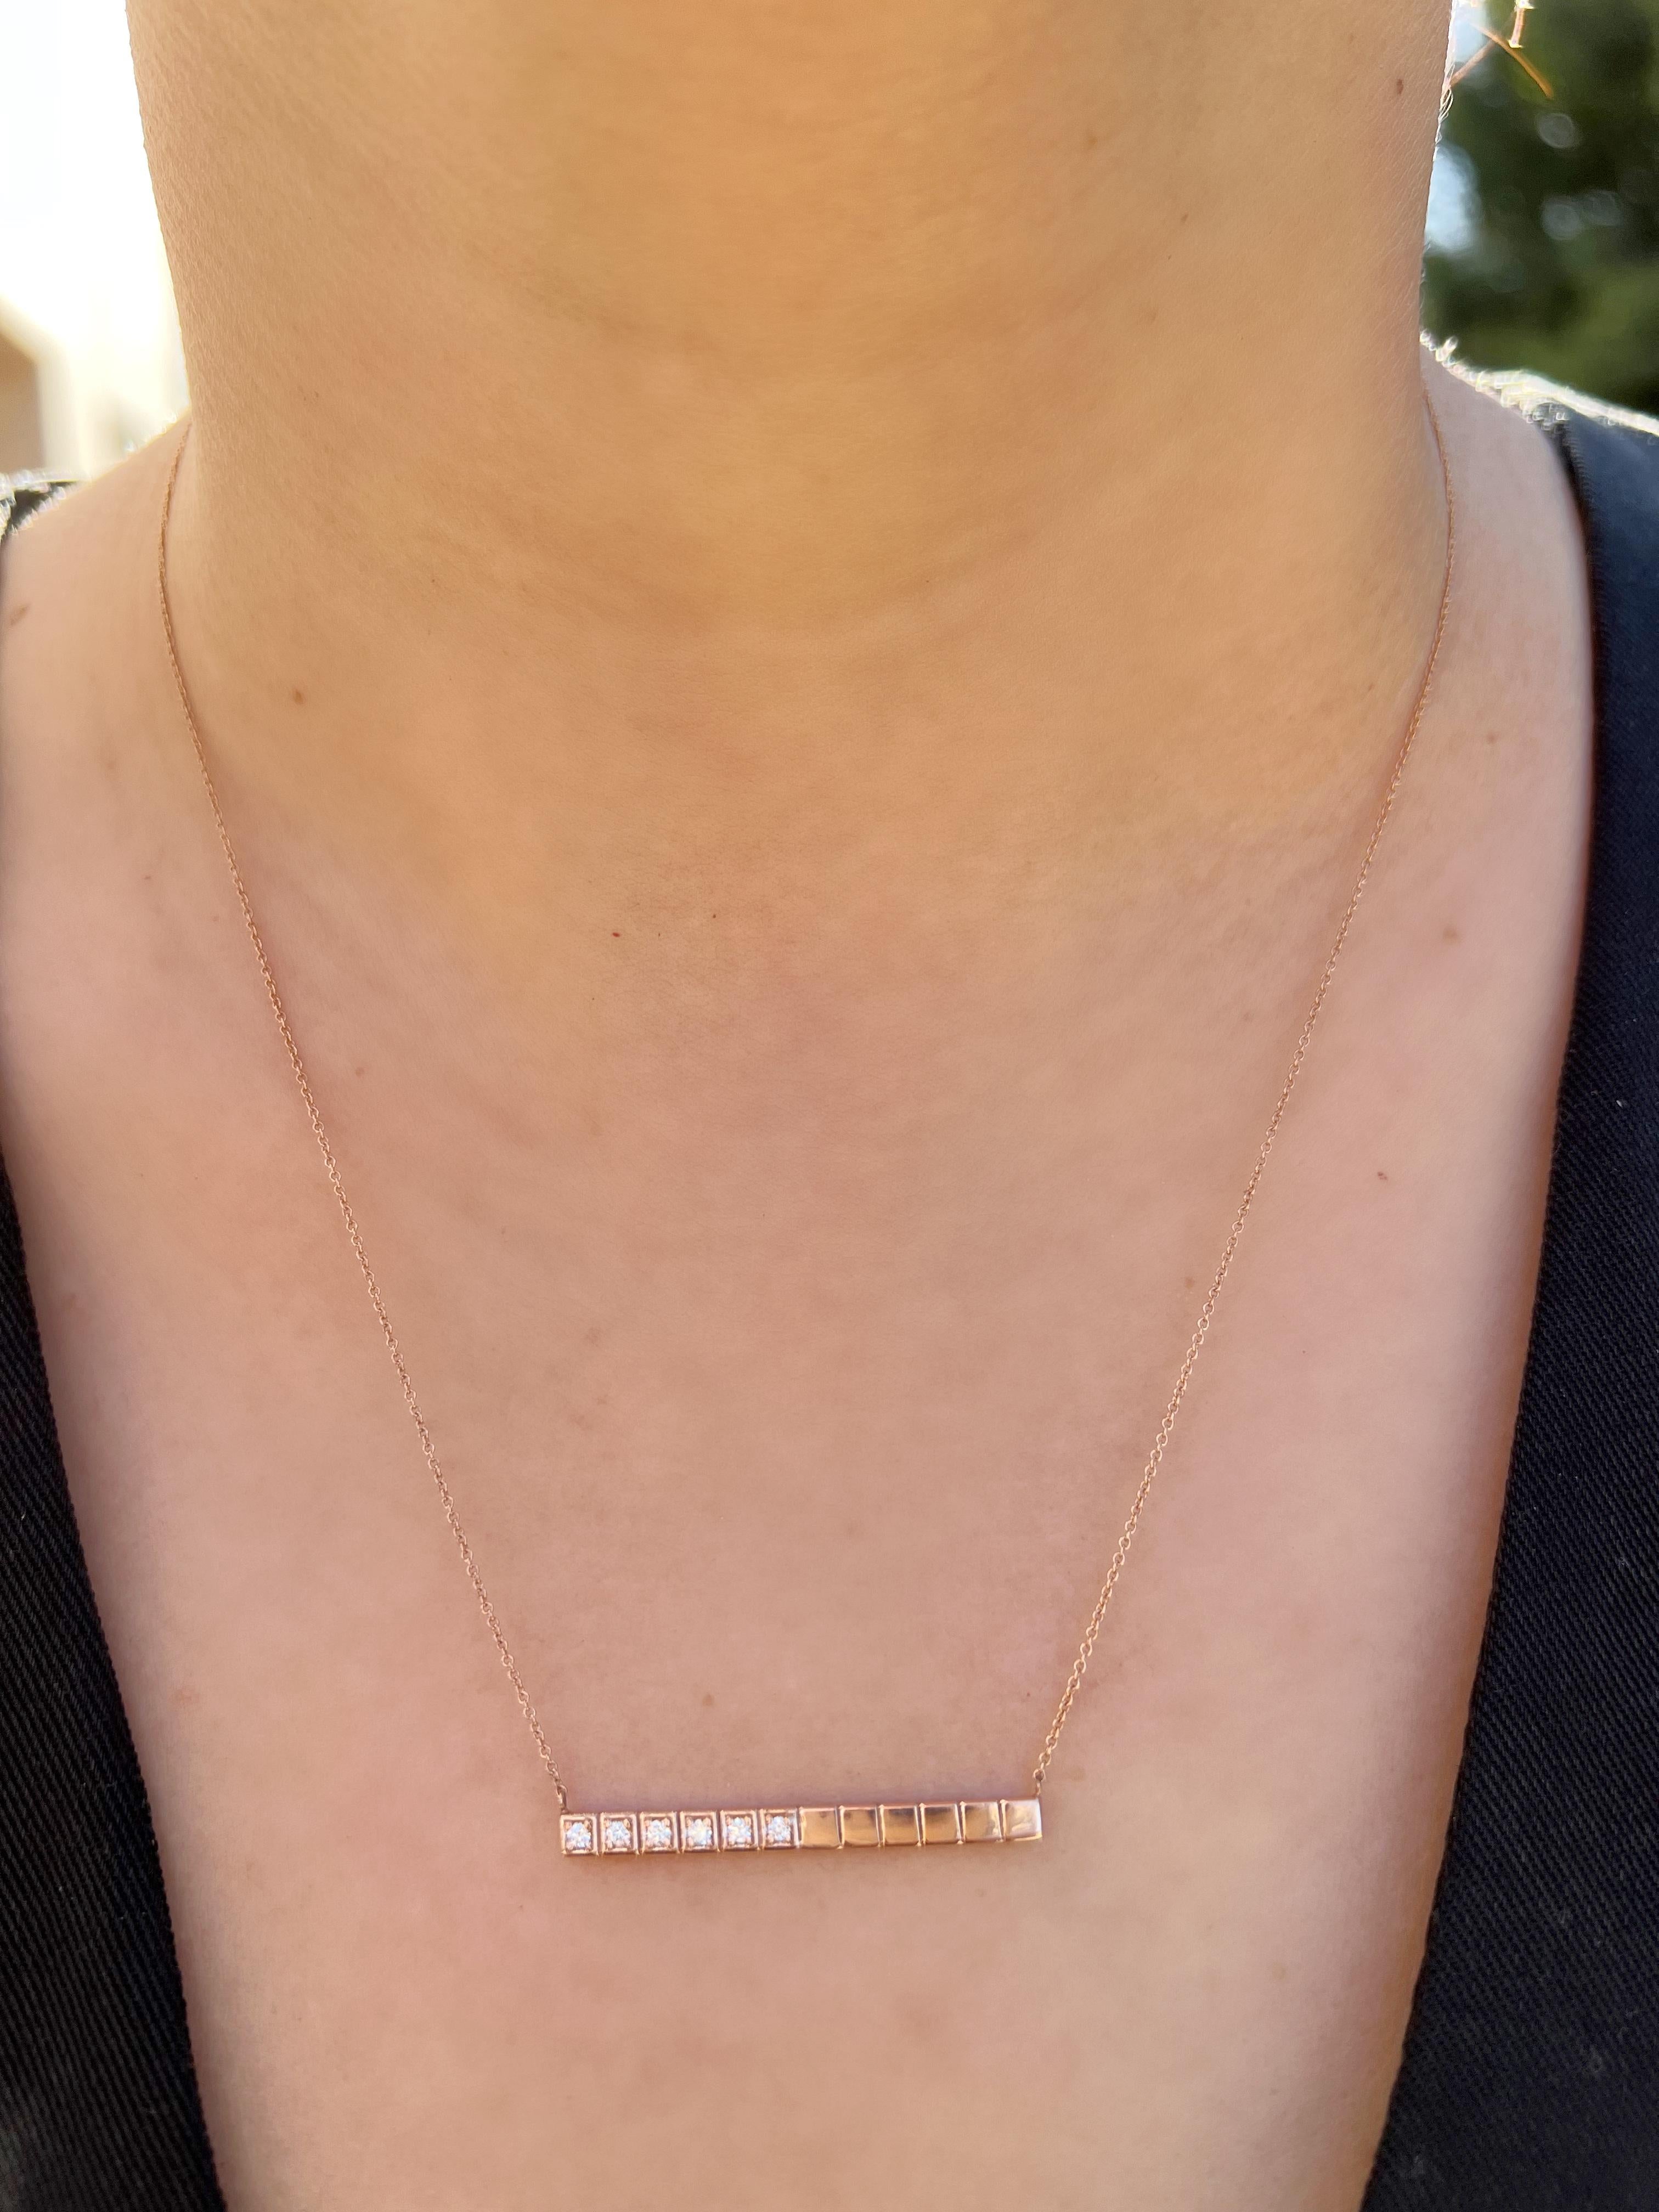 Crafted in 14K gold and round glistening diamonds, this Pendant is completed with a bar of geometric cubes, half encrusted with shimmering diamonds to create a modern feel. This stunning gold bar necklace is a simple piece that sits elegantly above